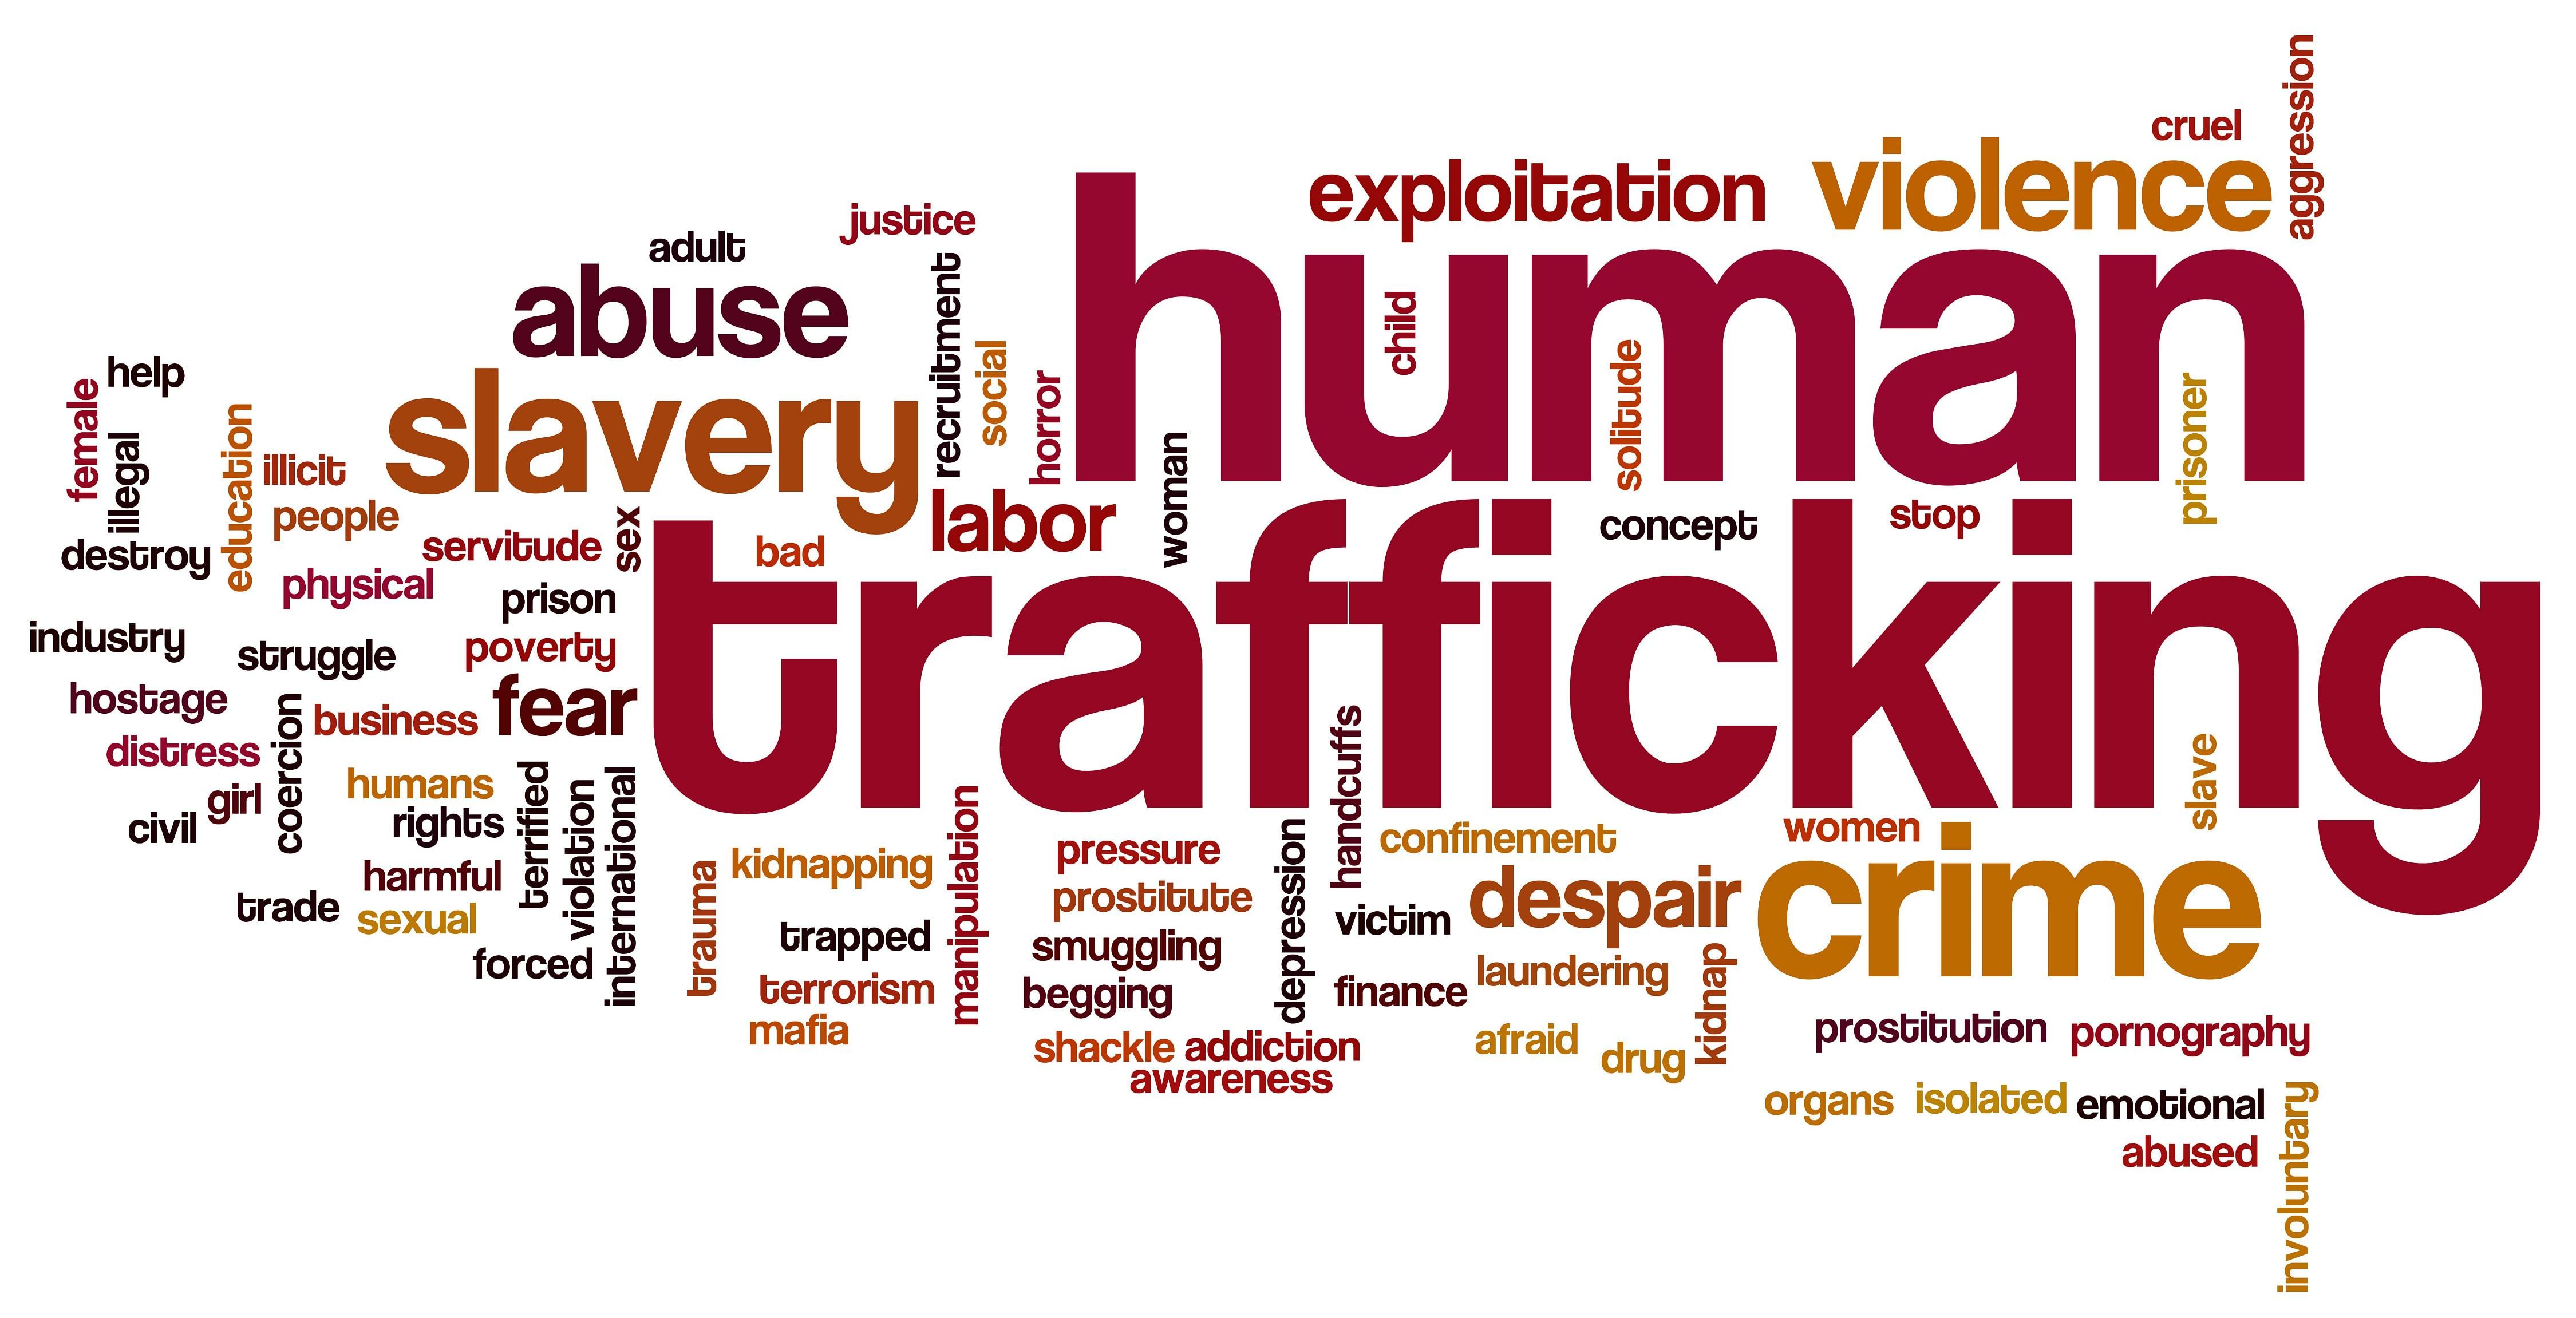 [World Human Rights Day] Time to unite against human trafficking, which strips people of basic rights